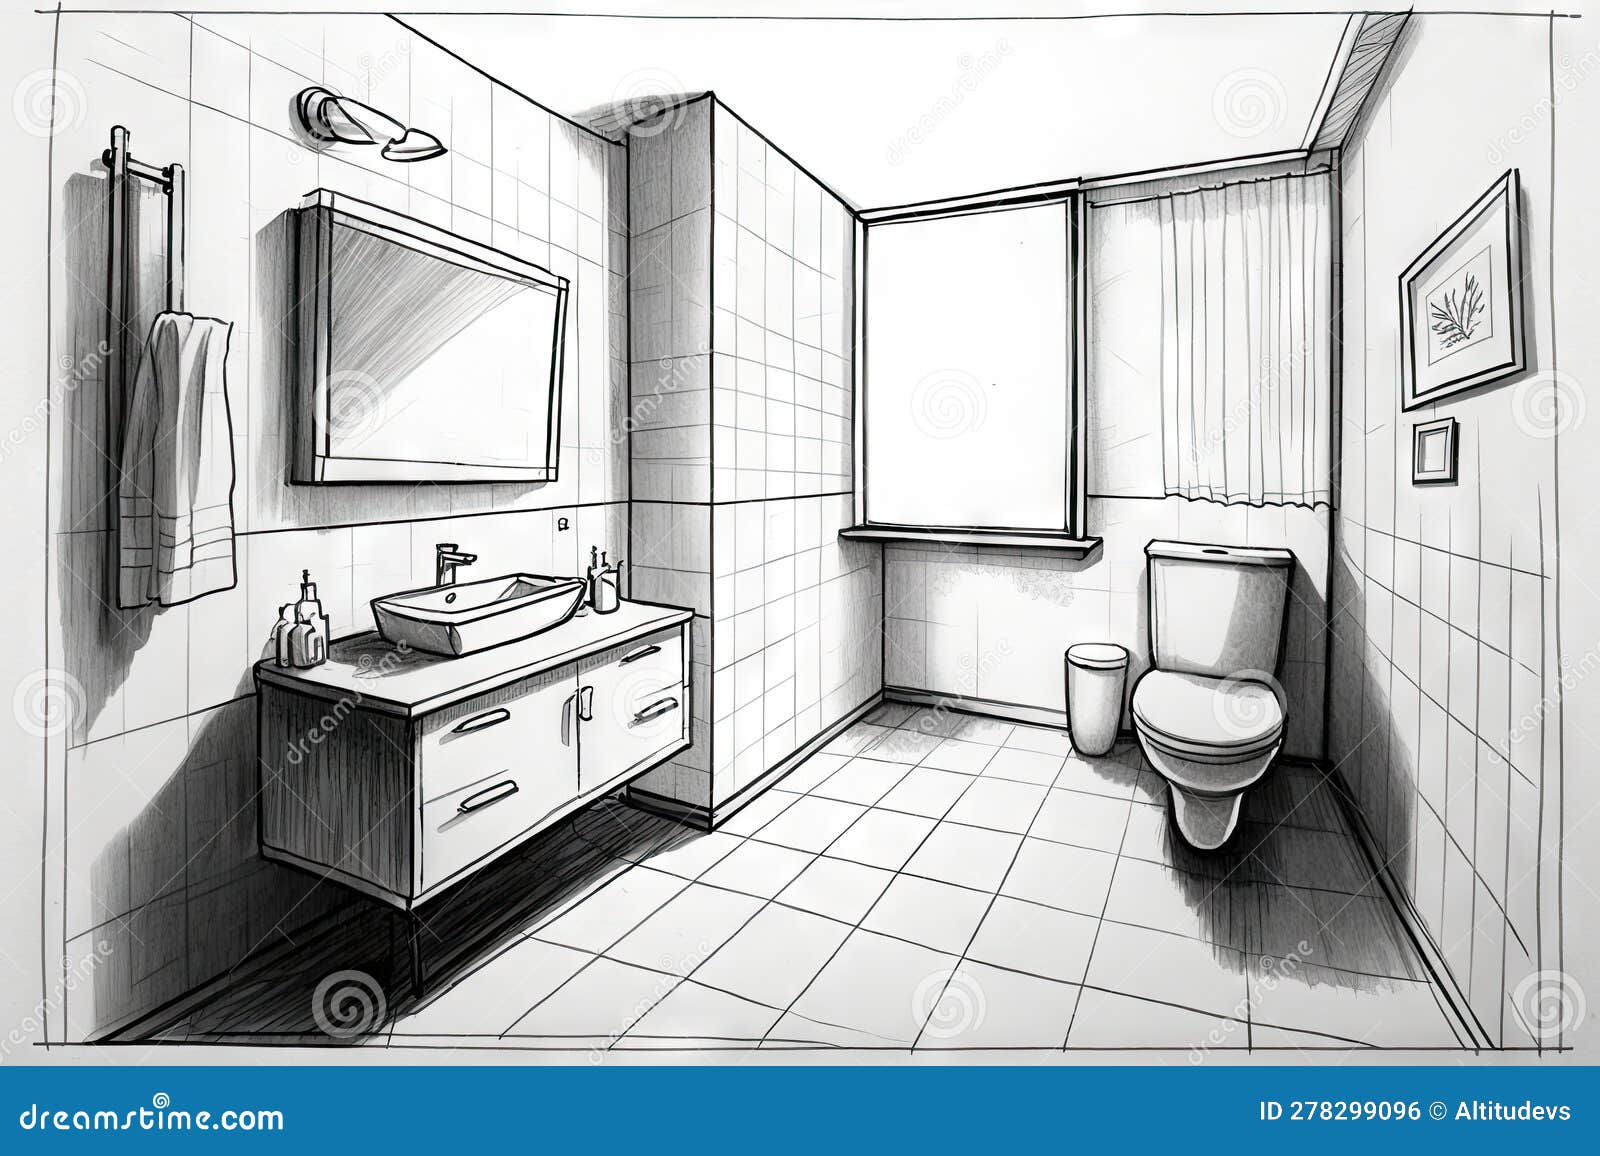 Linear sketch of an interior part the bathroom Vector Image